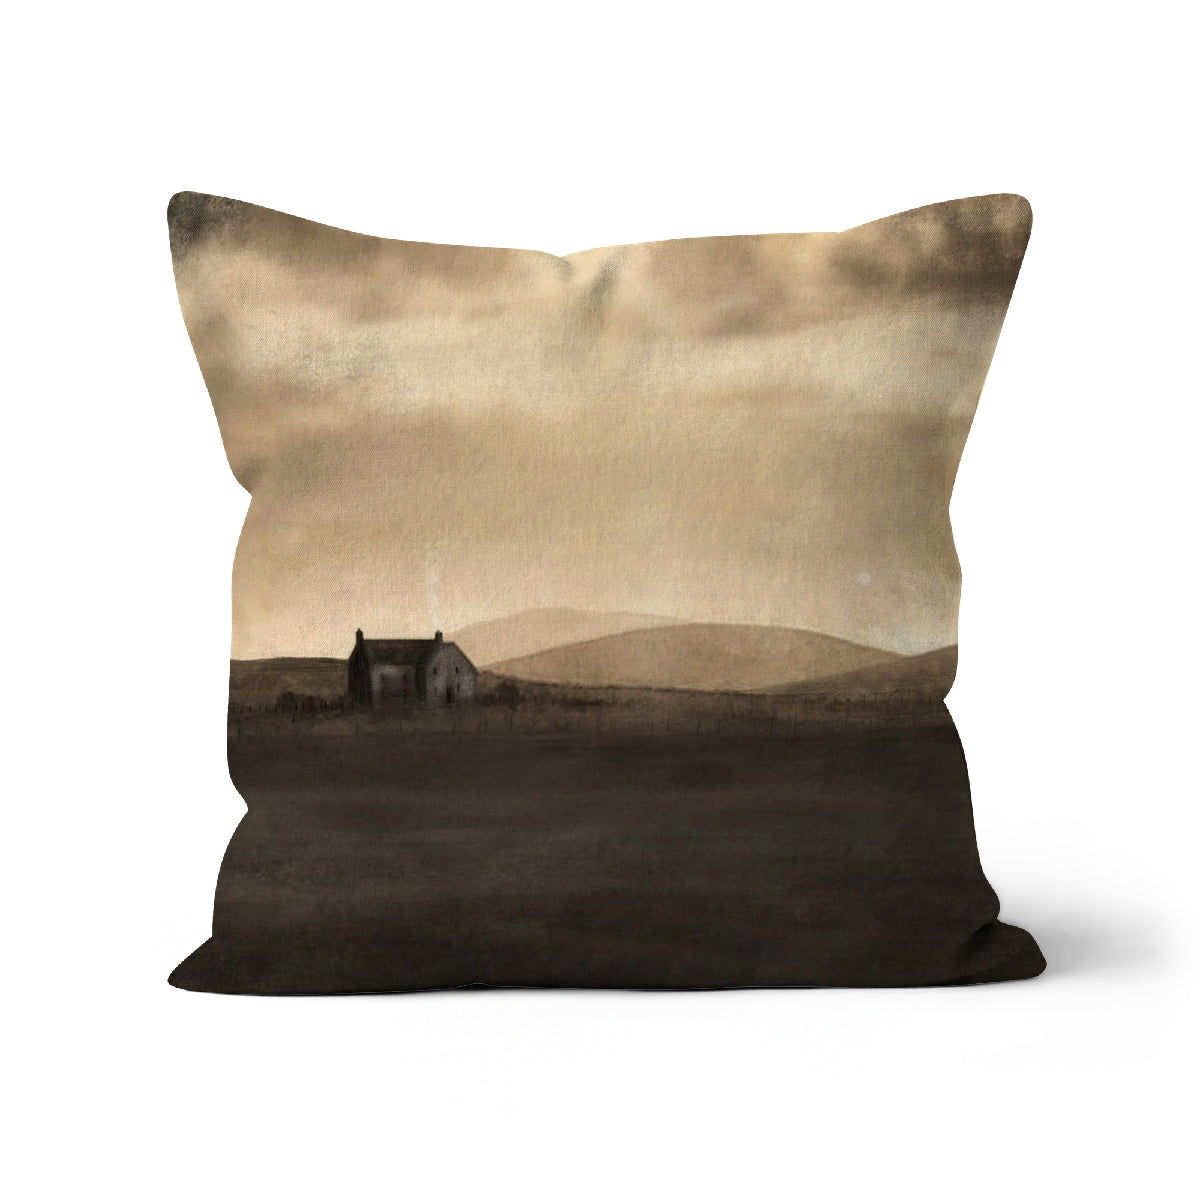 A Moonlit Croft Art Gifts Cushion-Cushions-Hebridean Islands Art Gallery-Faux Suede-12"x12"-Paintings, Prints, Homeware, Art Gifts From Scotland By Scottish Artist Kevin Hunter